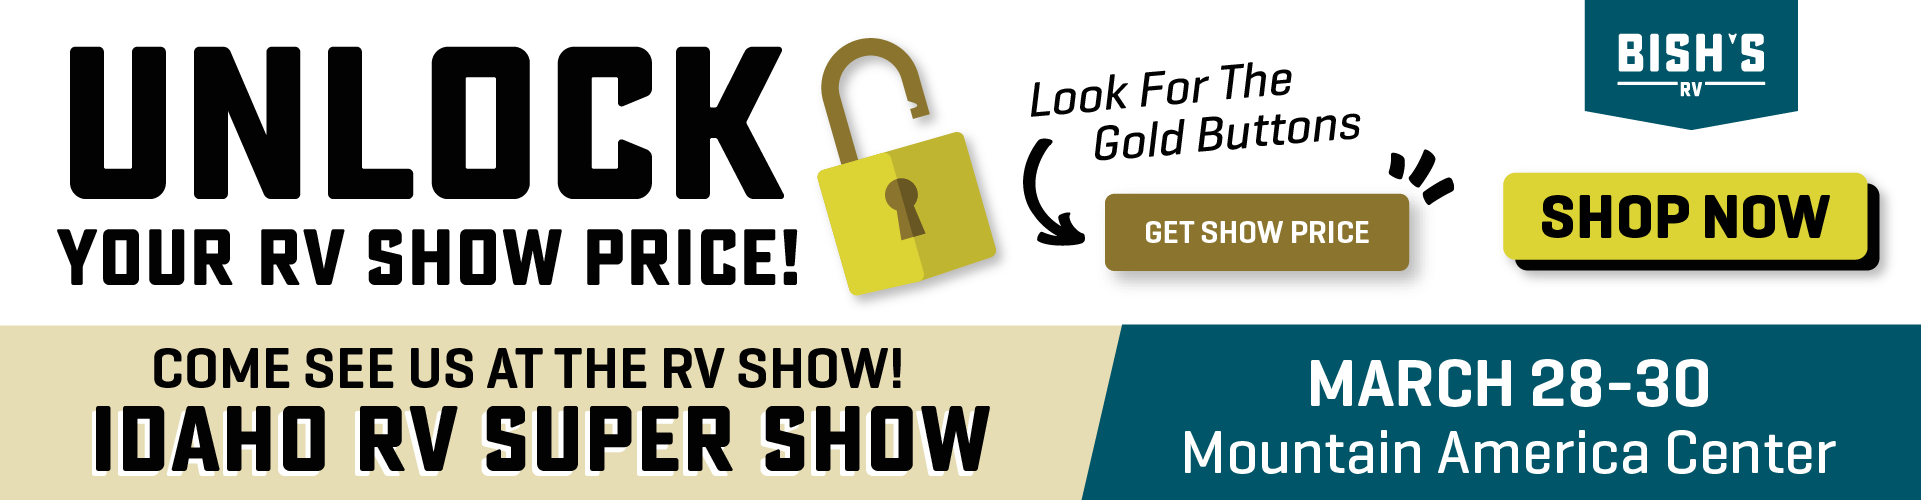 Unlock Your RV Show Price! Come to the Idaho RV Super Show - March 28-30 at the Hero Arena inside the Mountain America Center!